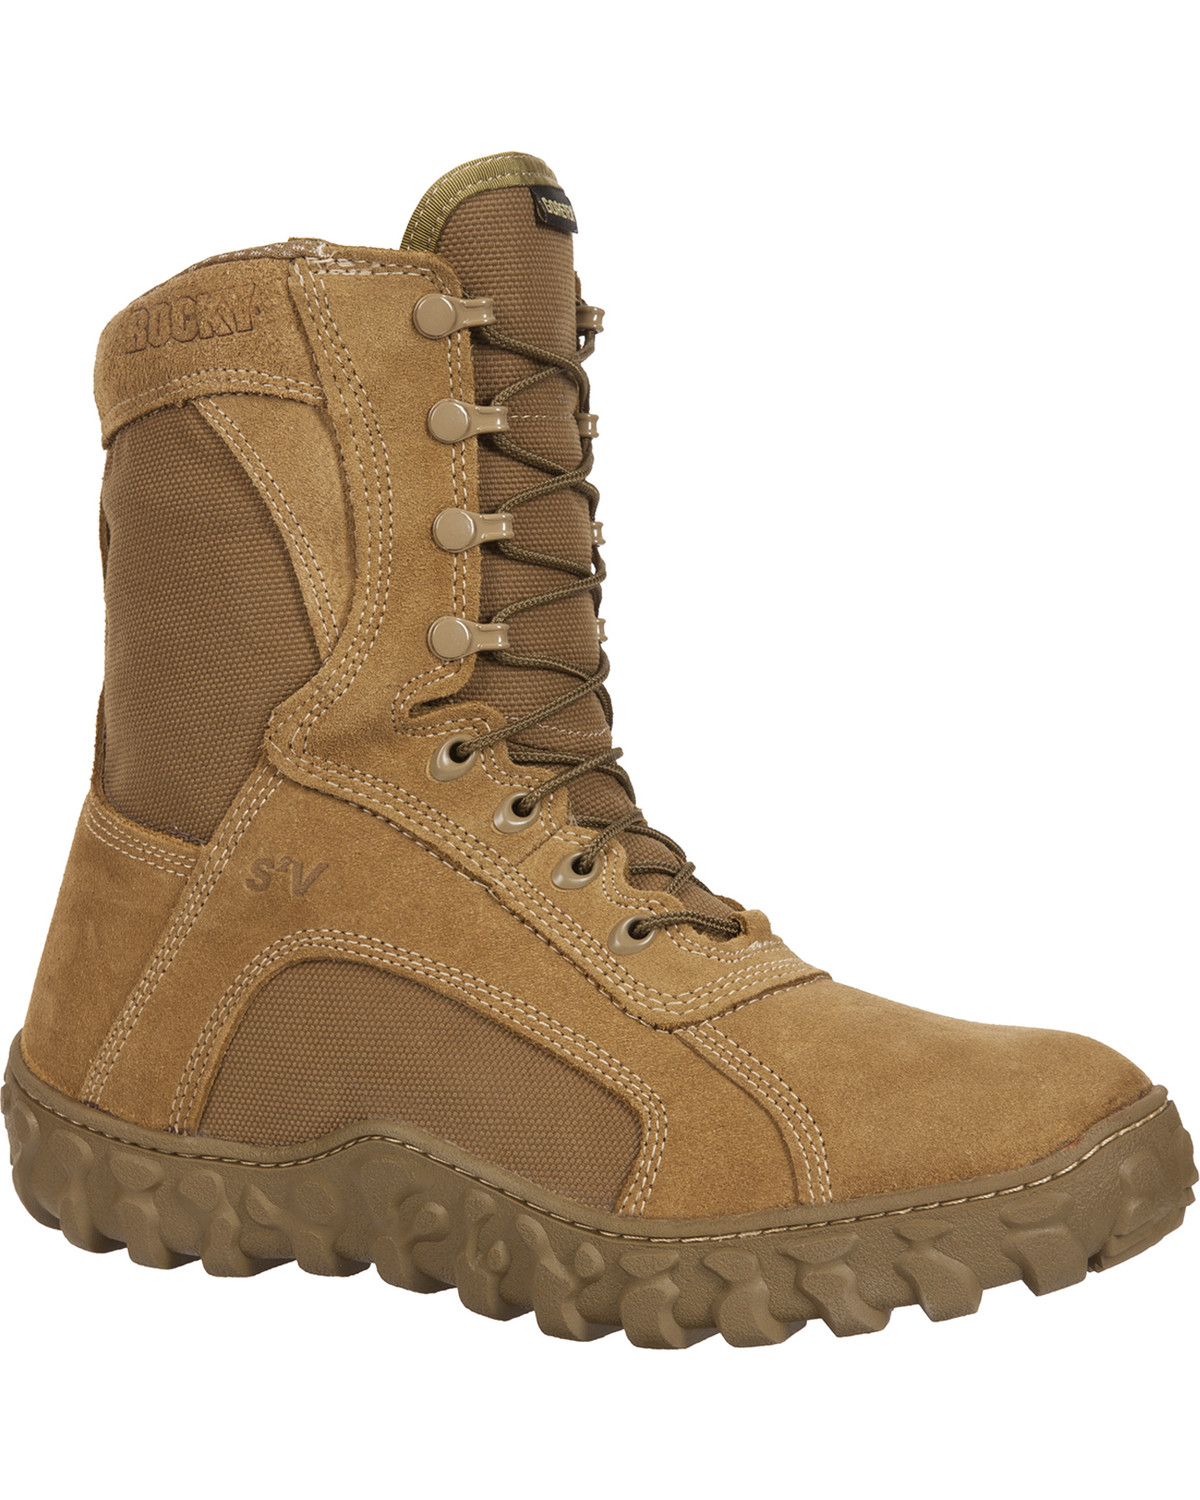 Rocky S2V Gore-Tex Waterproof Insulated Military Duty Boots - Round Toe